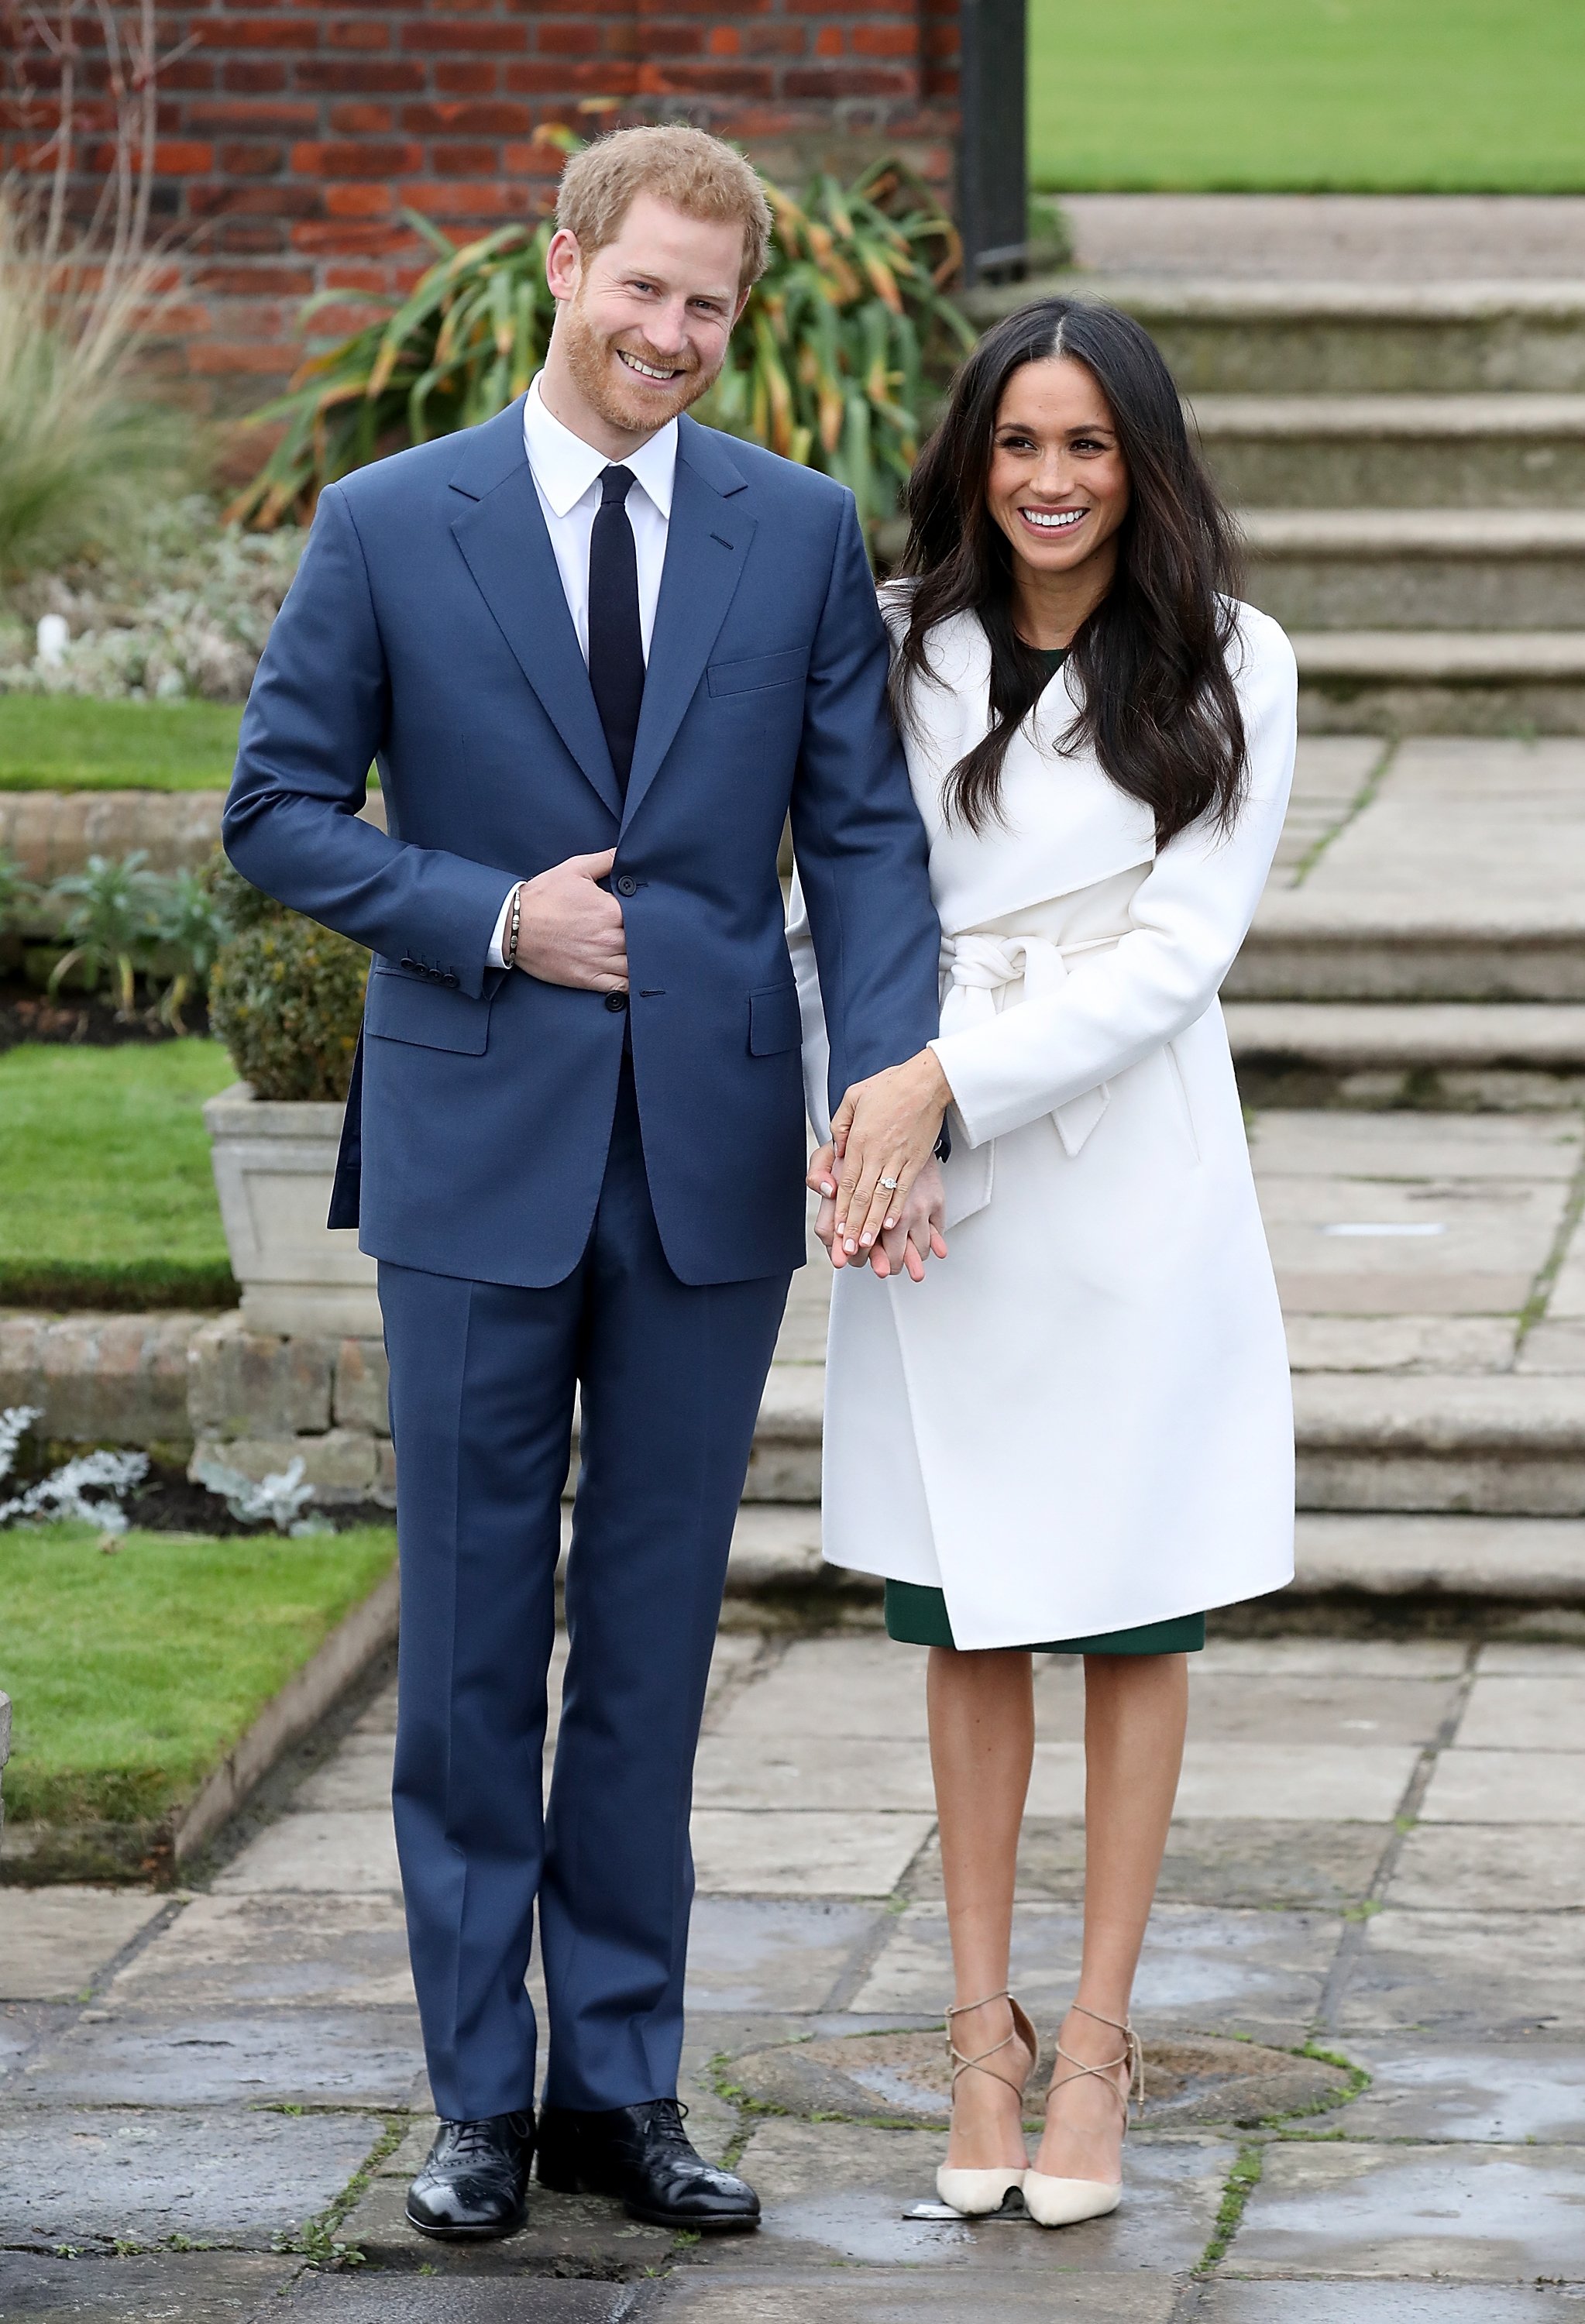 Prince Harry and Meghan Markle during an official photocall to announce their engagement at The Sunken Gardens at Kensington Palace on November 27, 2017 in London, England | Photo: Getty Images